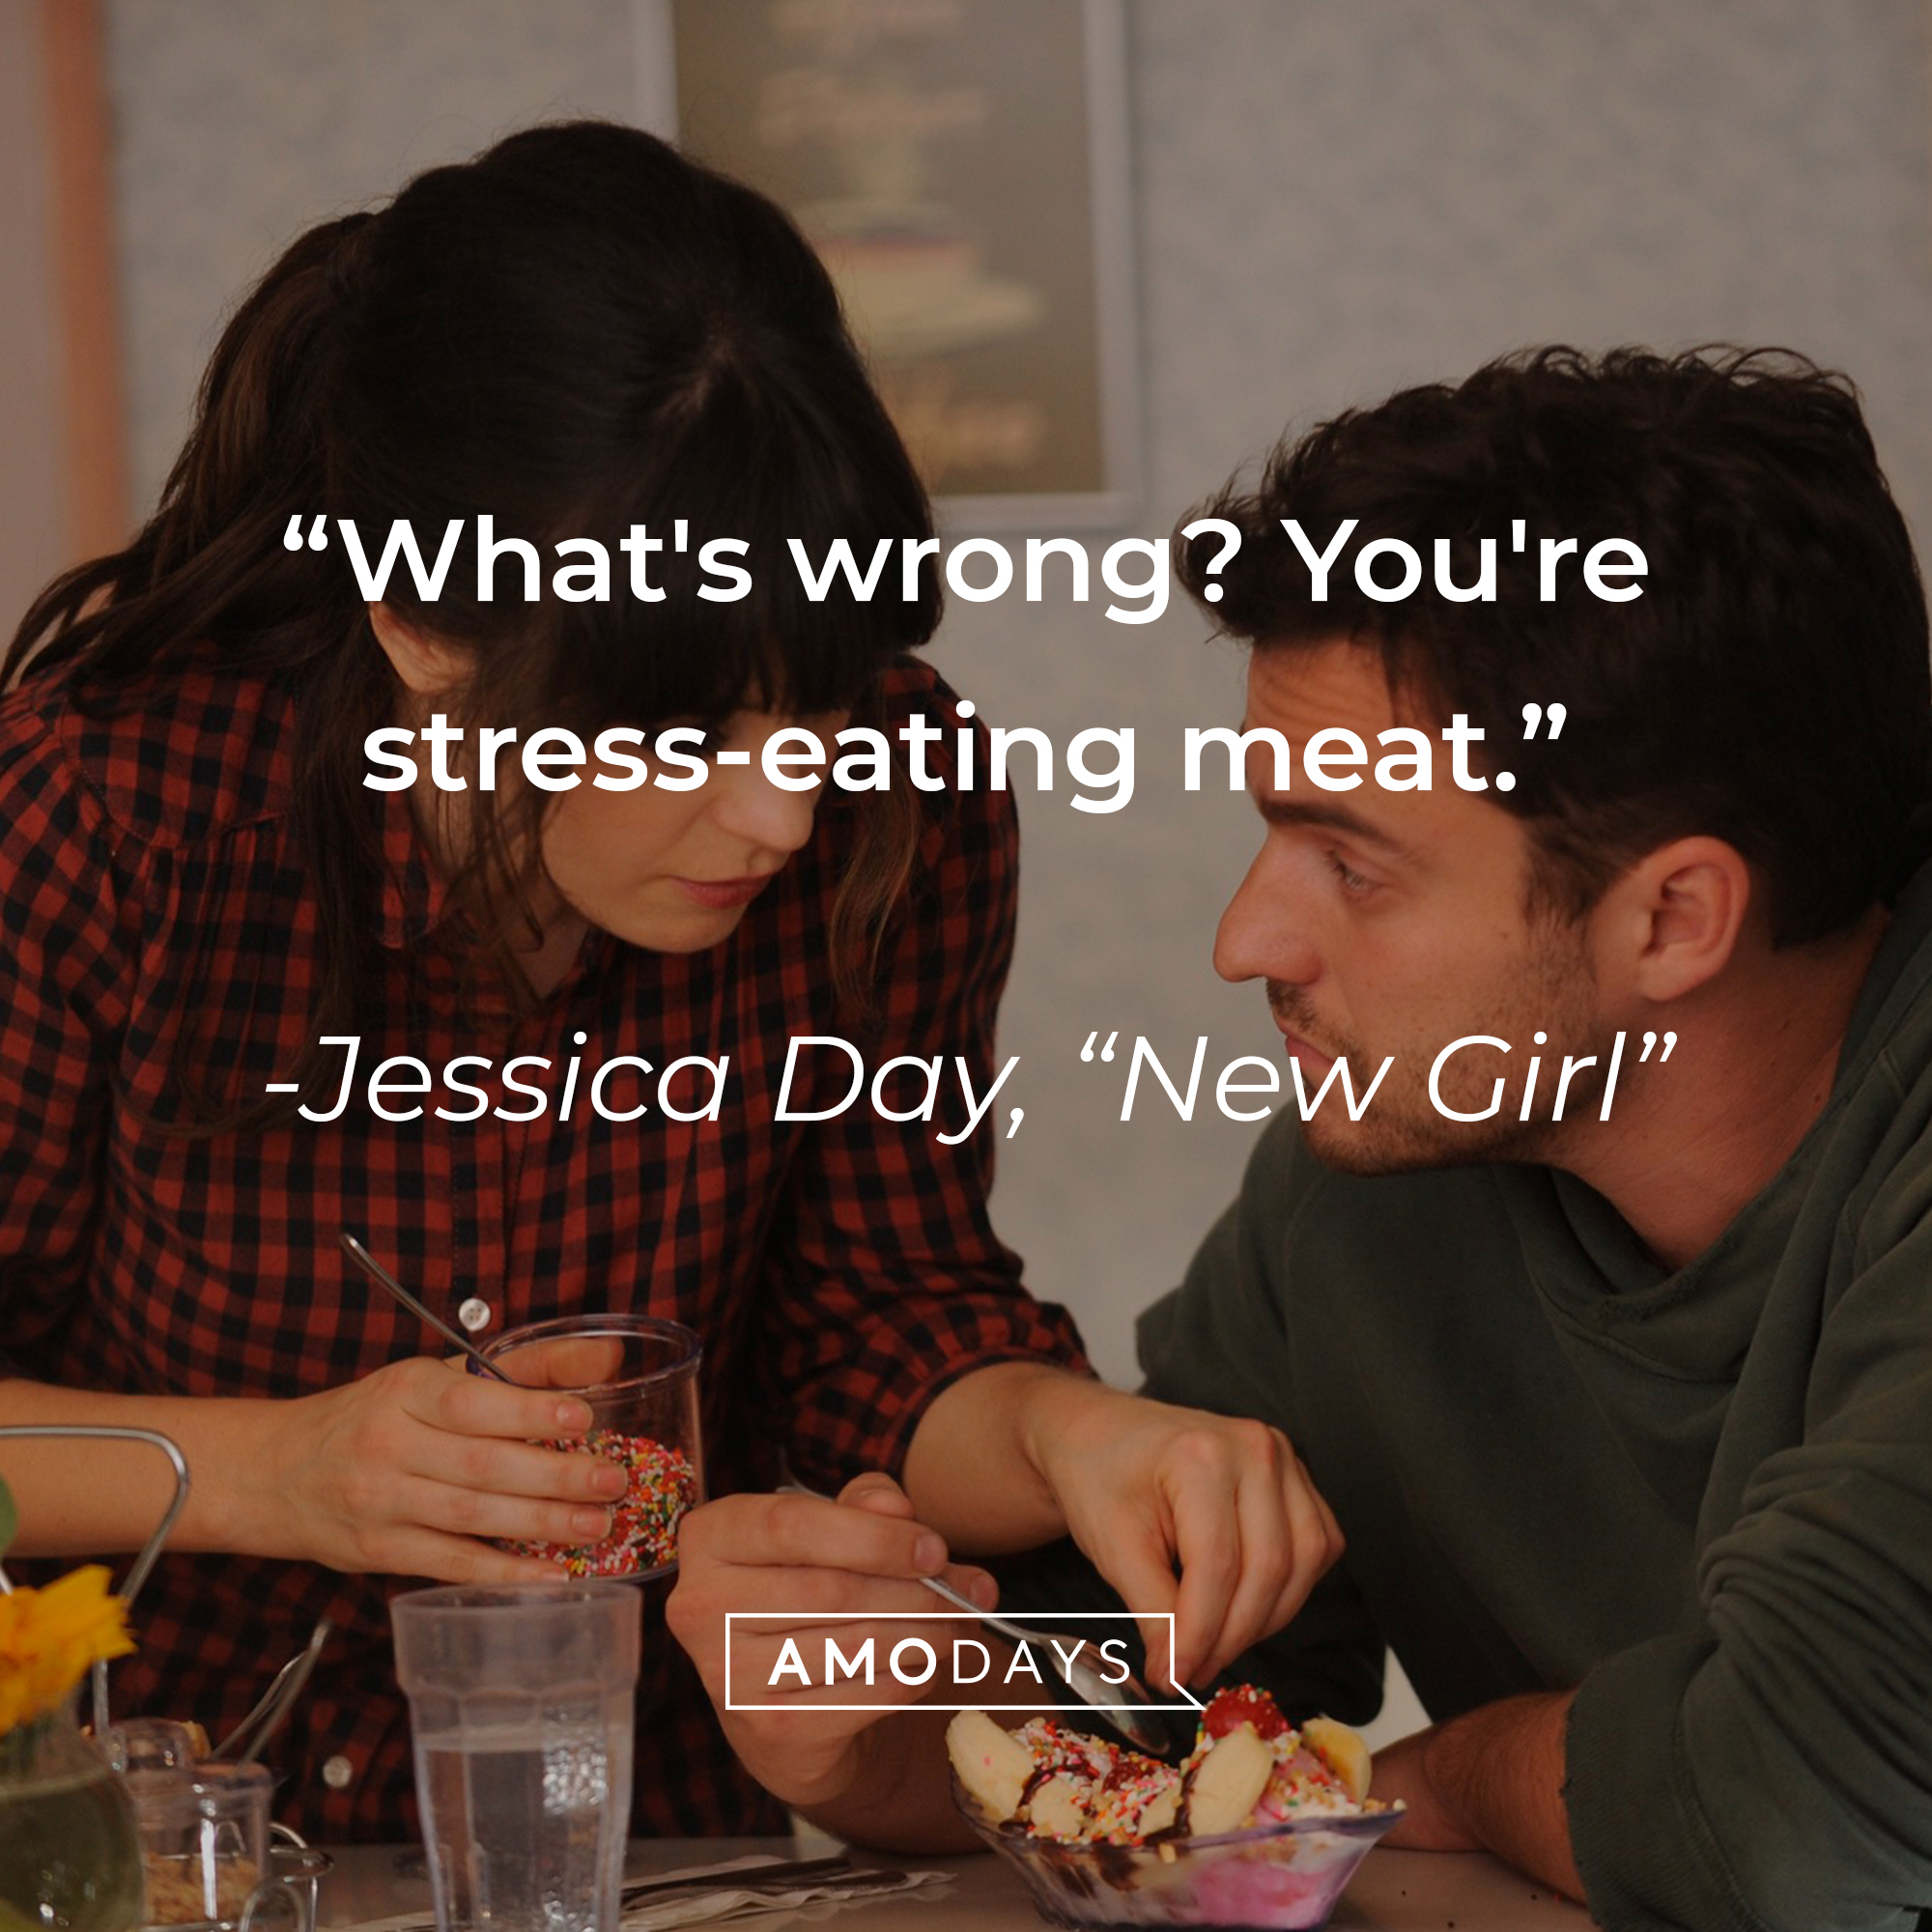 Jessica Day’s quote from “New Girl”: “What's wrong? You're stress-eating meat.” | Source: facebook.com/OfficialNewGirl